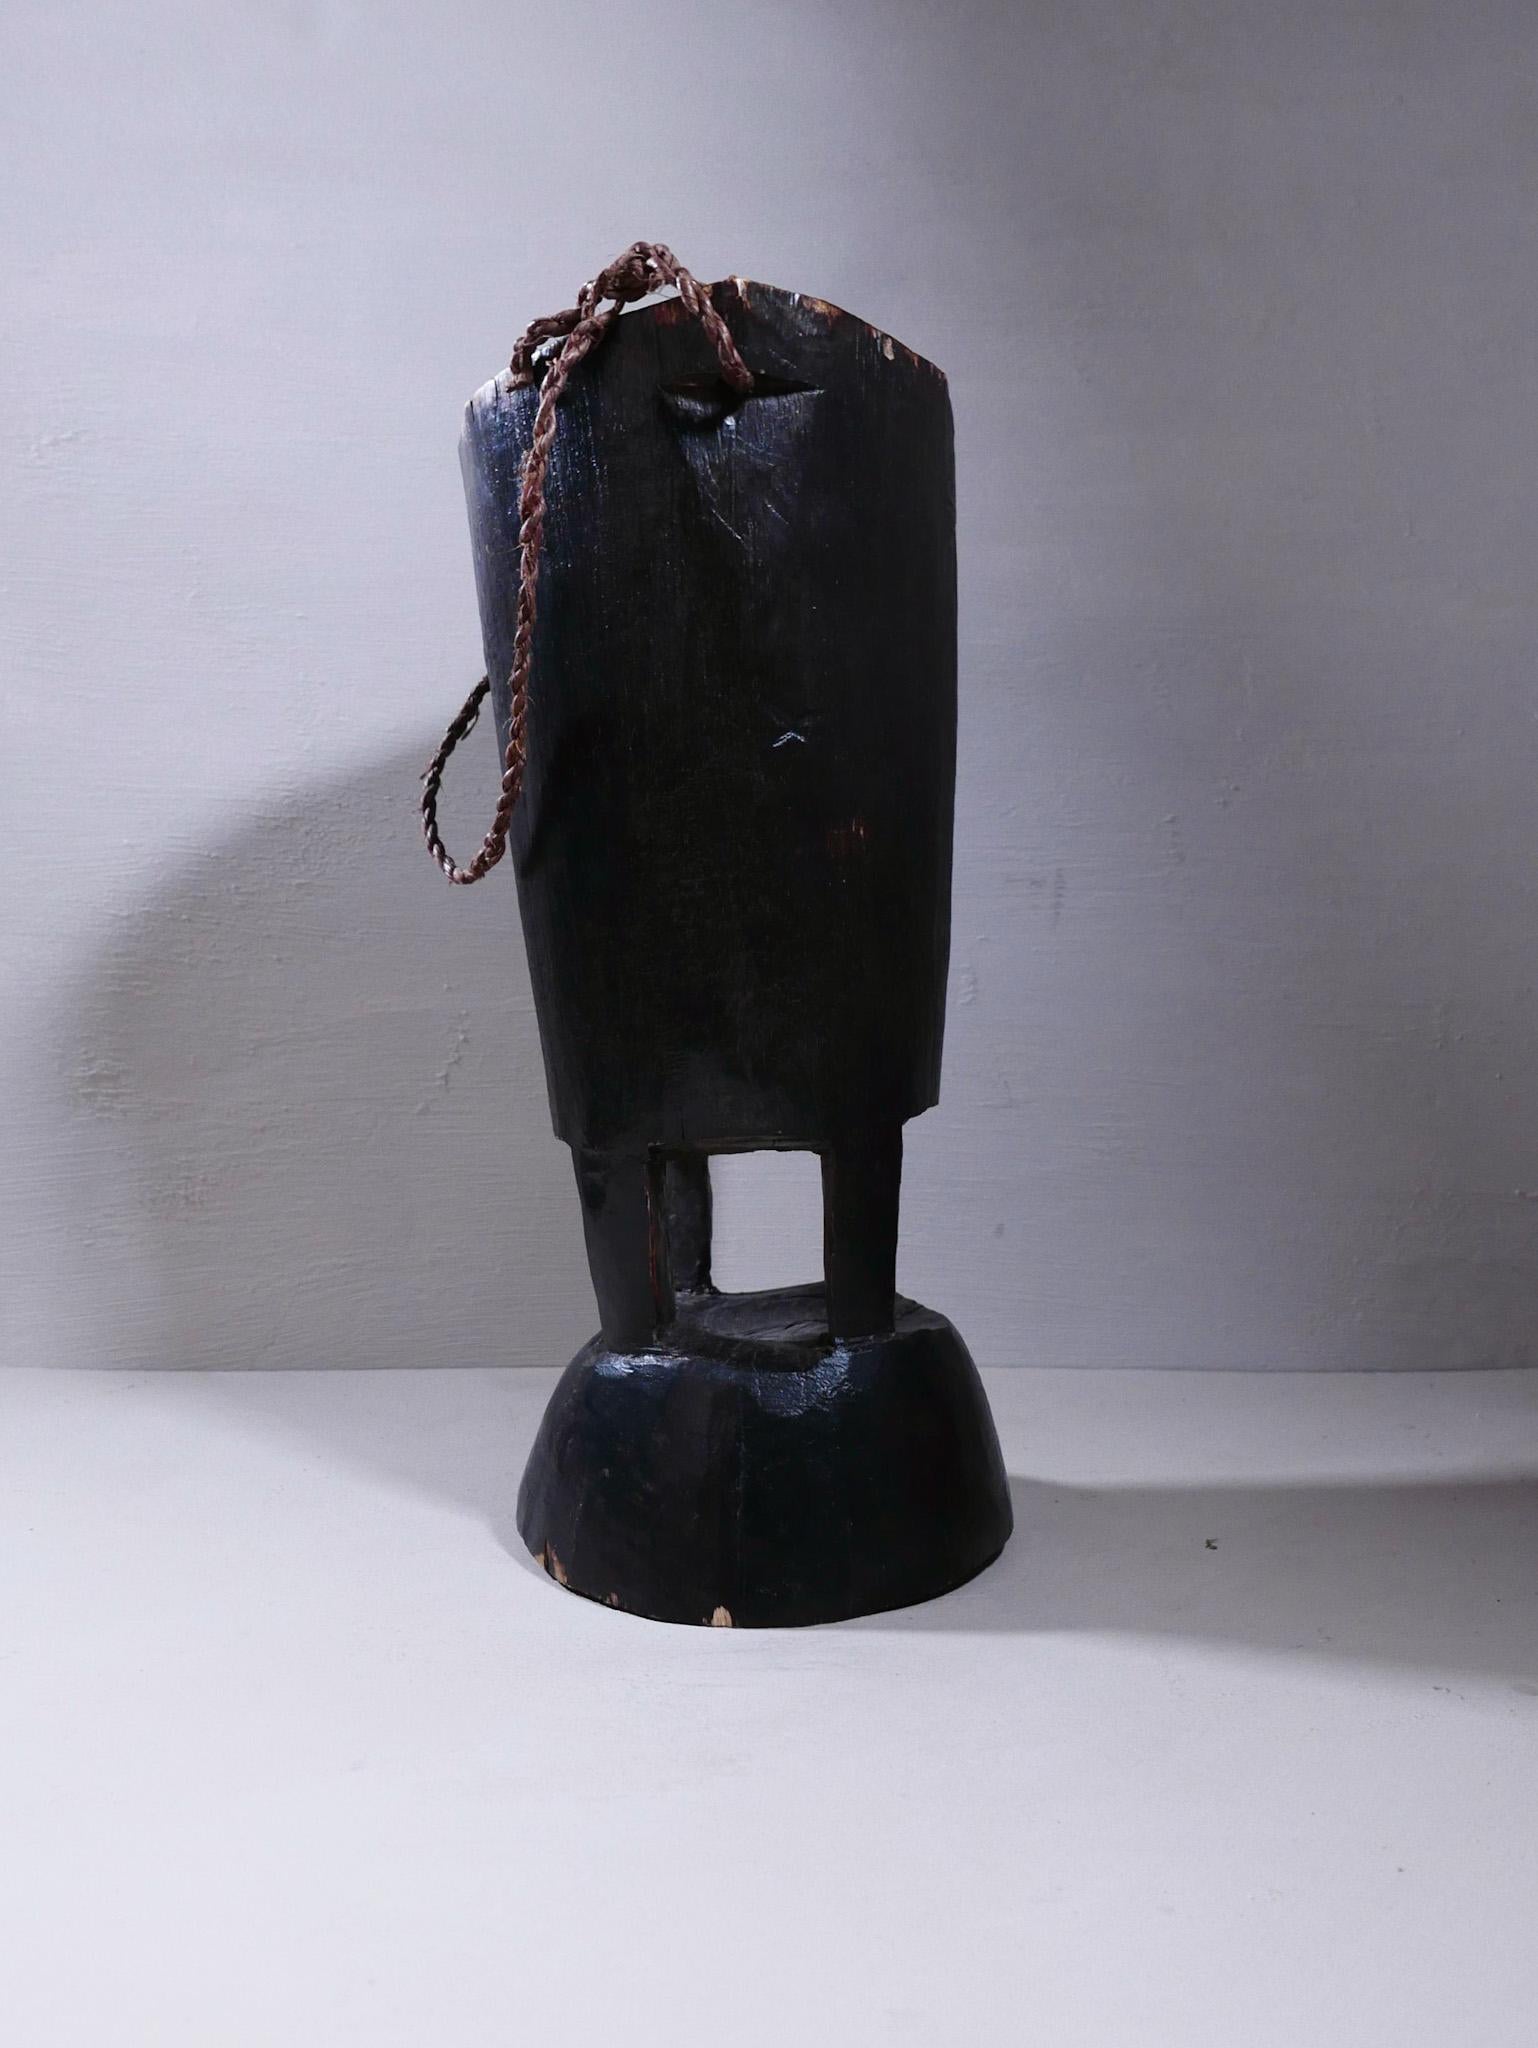 The Loss people of Zambia are known for their basketry and rarely work in wood, but their wooden milk jugs are sought after objects from collectors. Originally used to collect milk from cows. This particular jug comes with a rope handle. 
